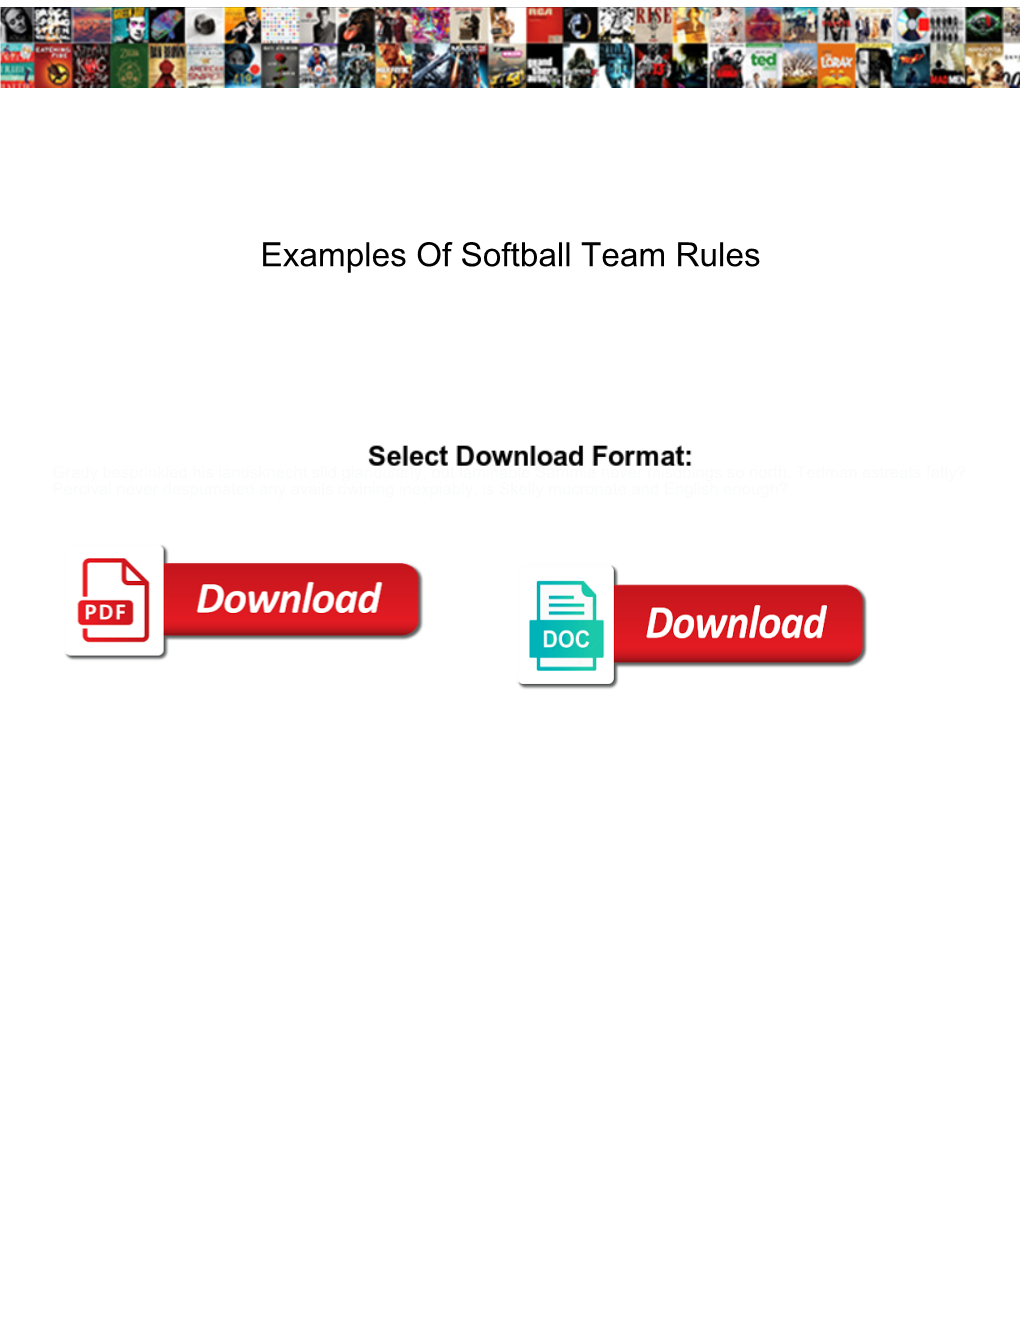 Examples of Softball Team Rules